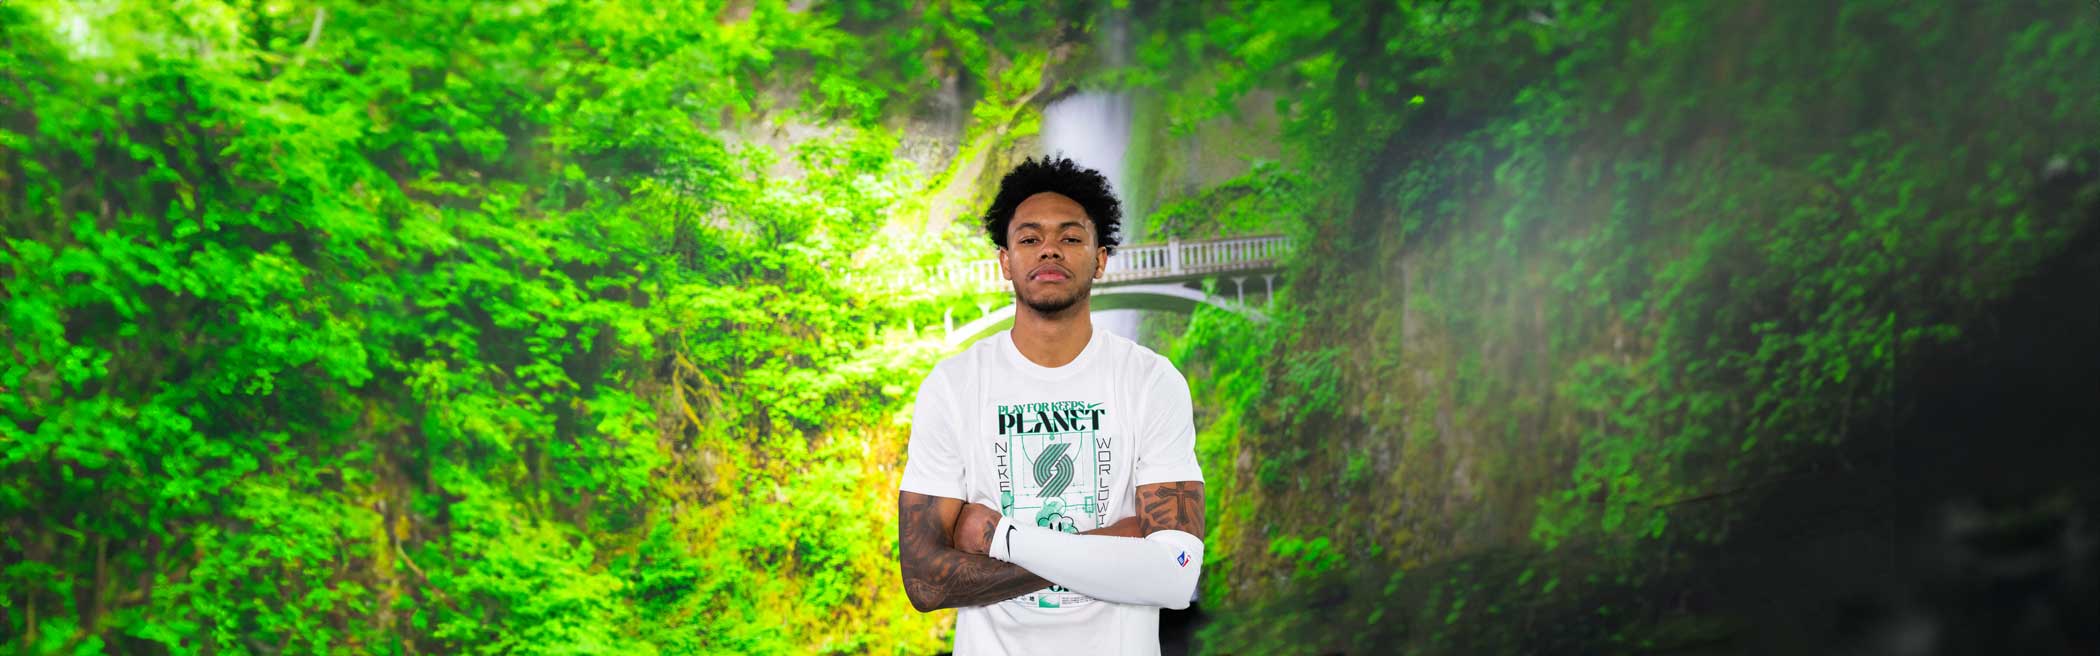 Anfernee in our Green Planet Nike Shirt